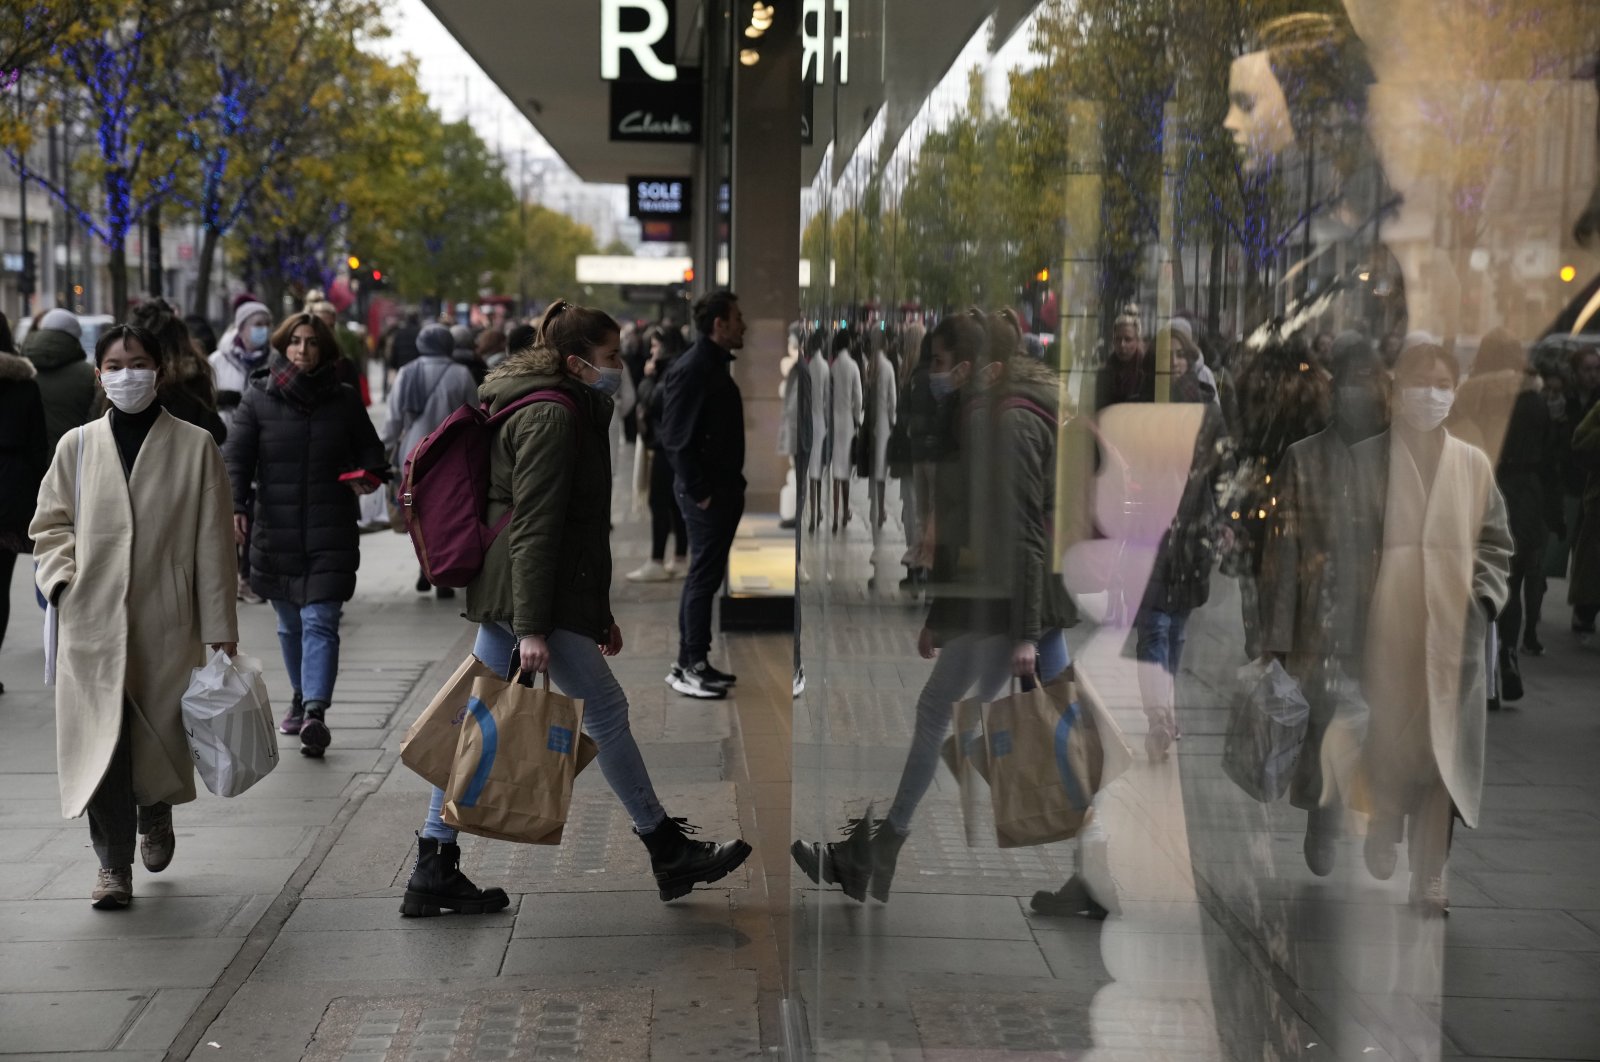 A woman&#039;s reflection is seen as she walks into a shop on Oxford Street in London, Britain, Nov. 29, 2021. (AP Photo)